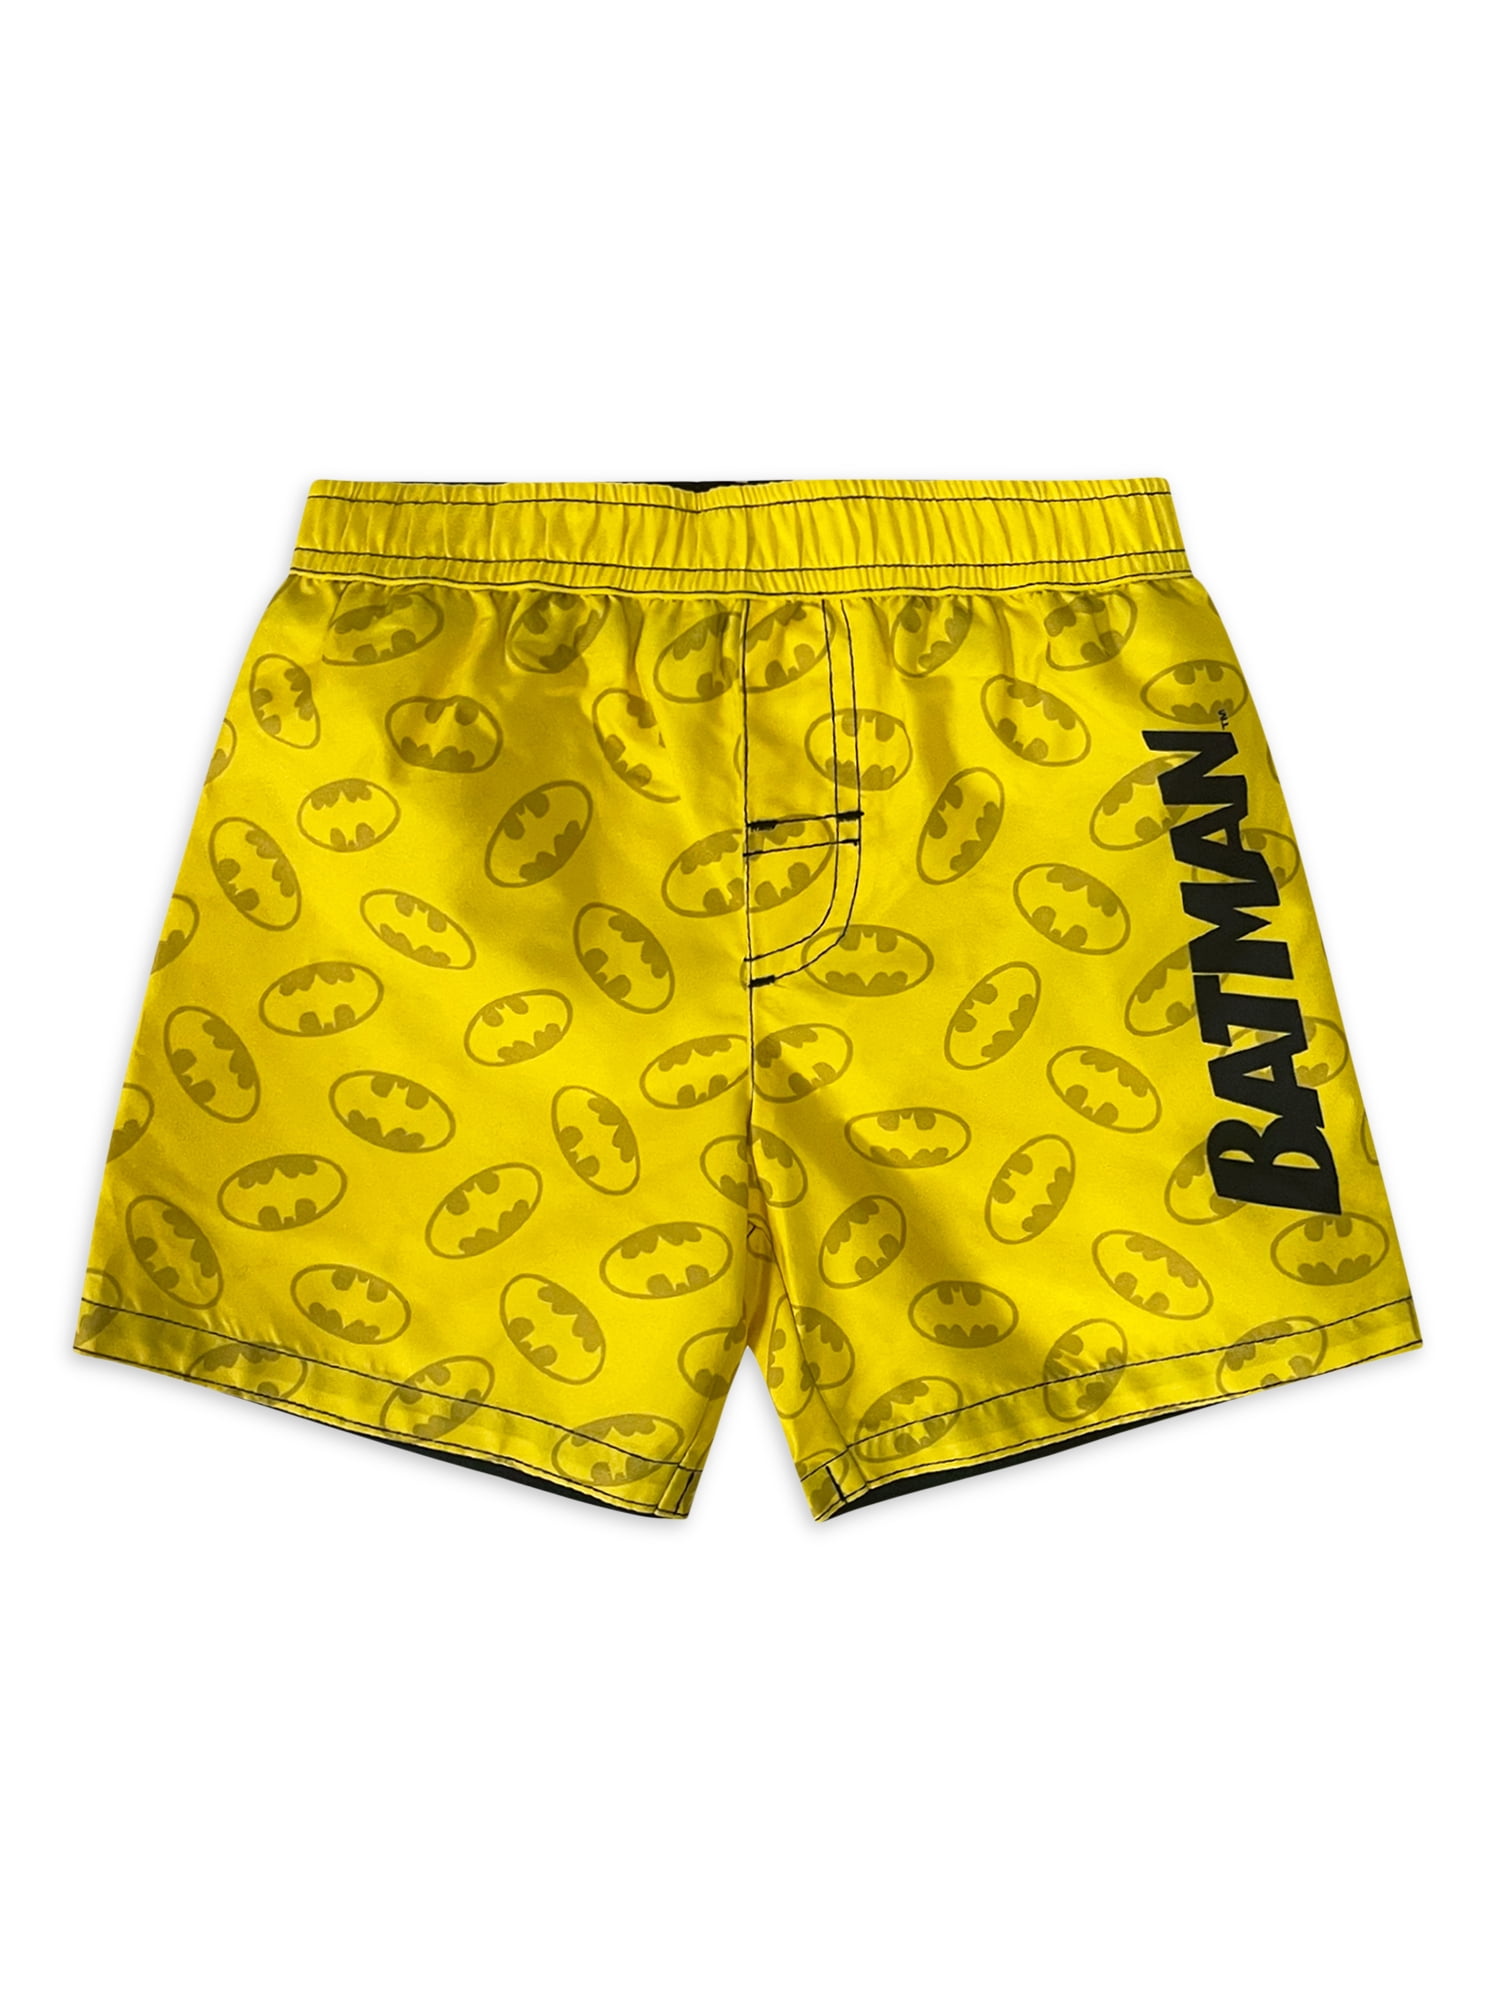 Details about   Circo Toddler Boys Swim Trunks shorts 12M NEW green yellow crab sea life 